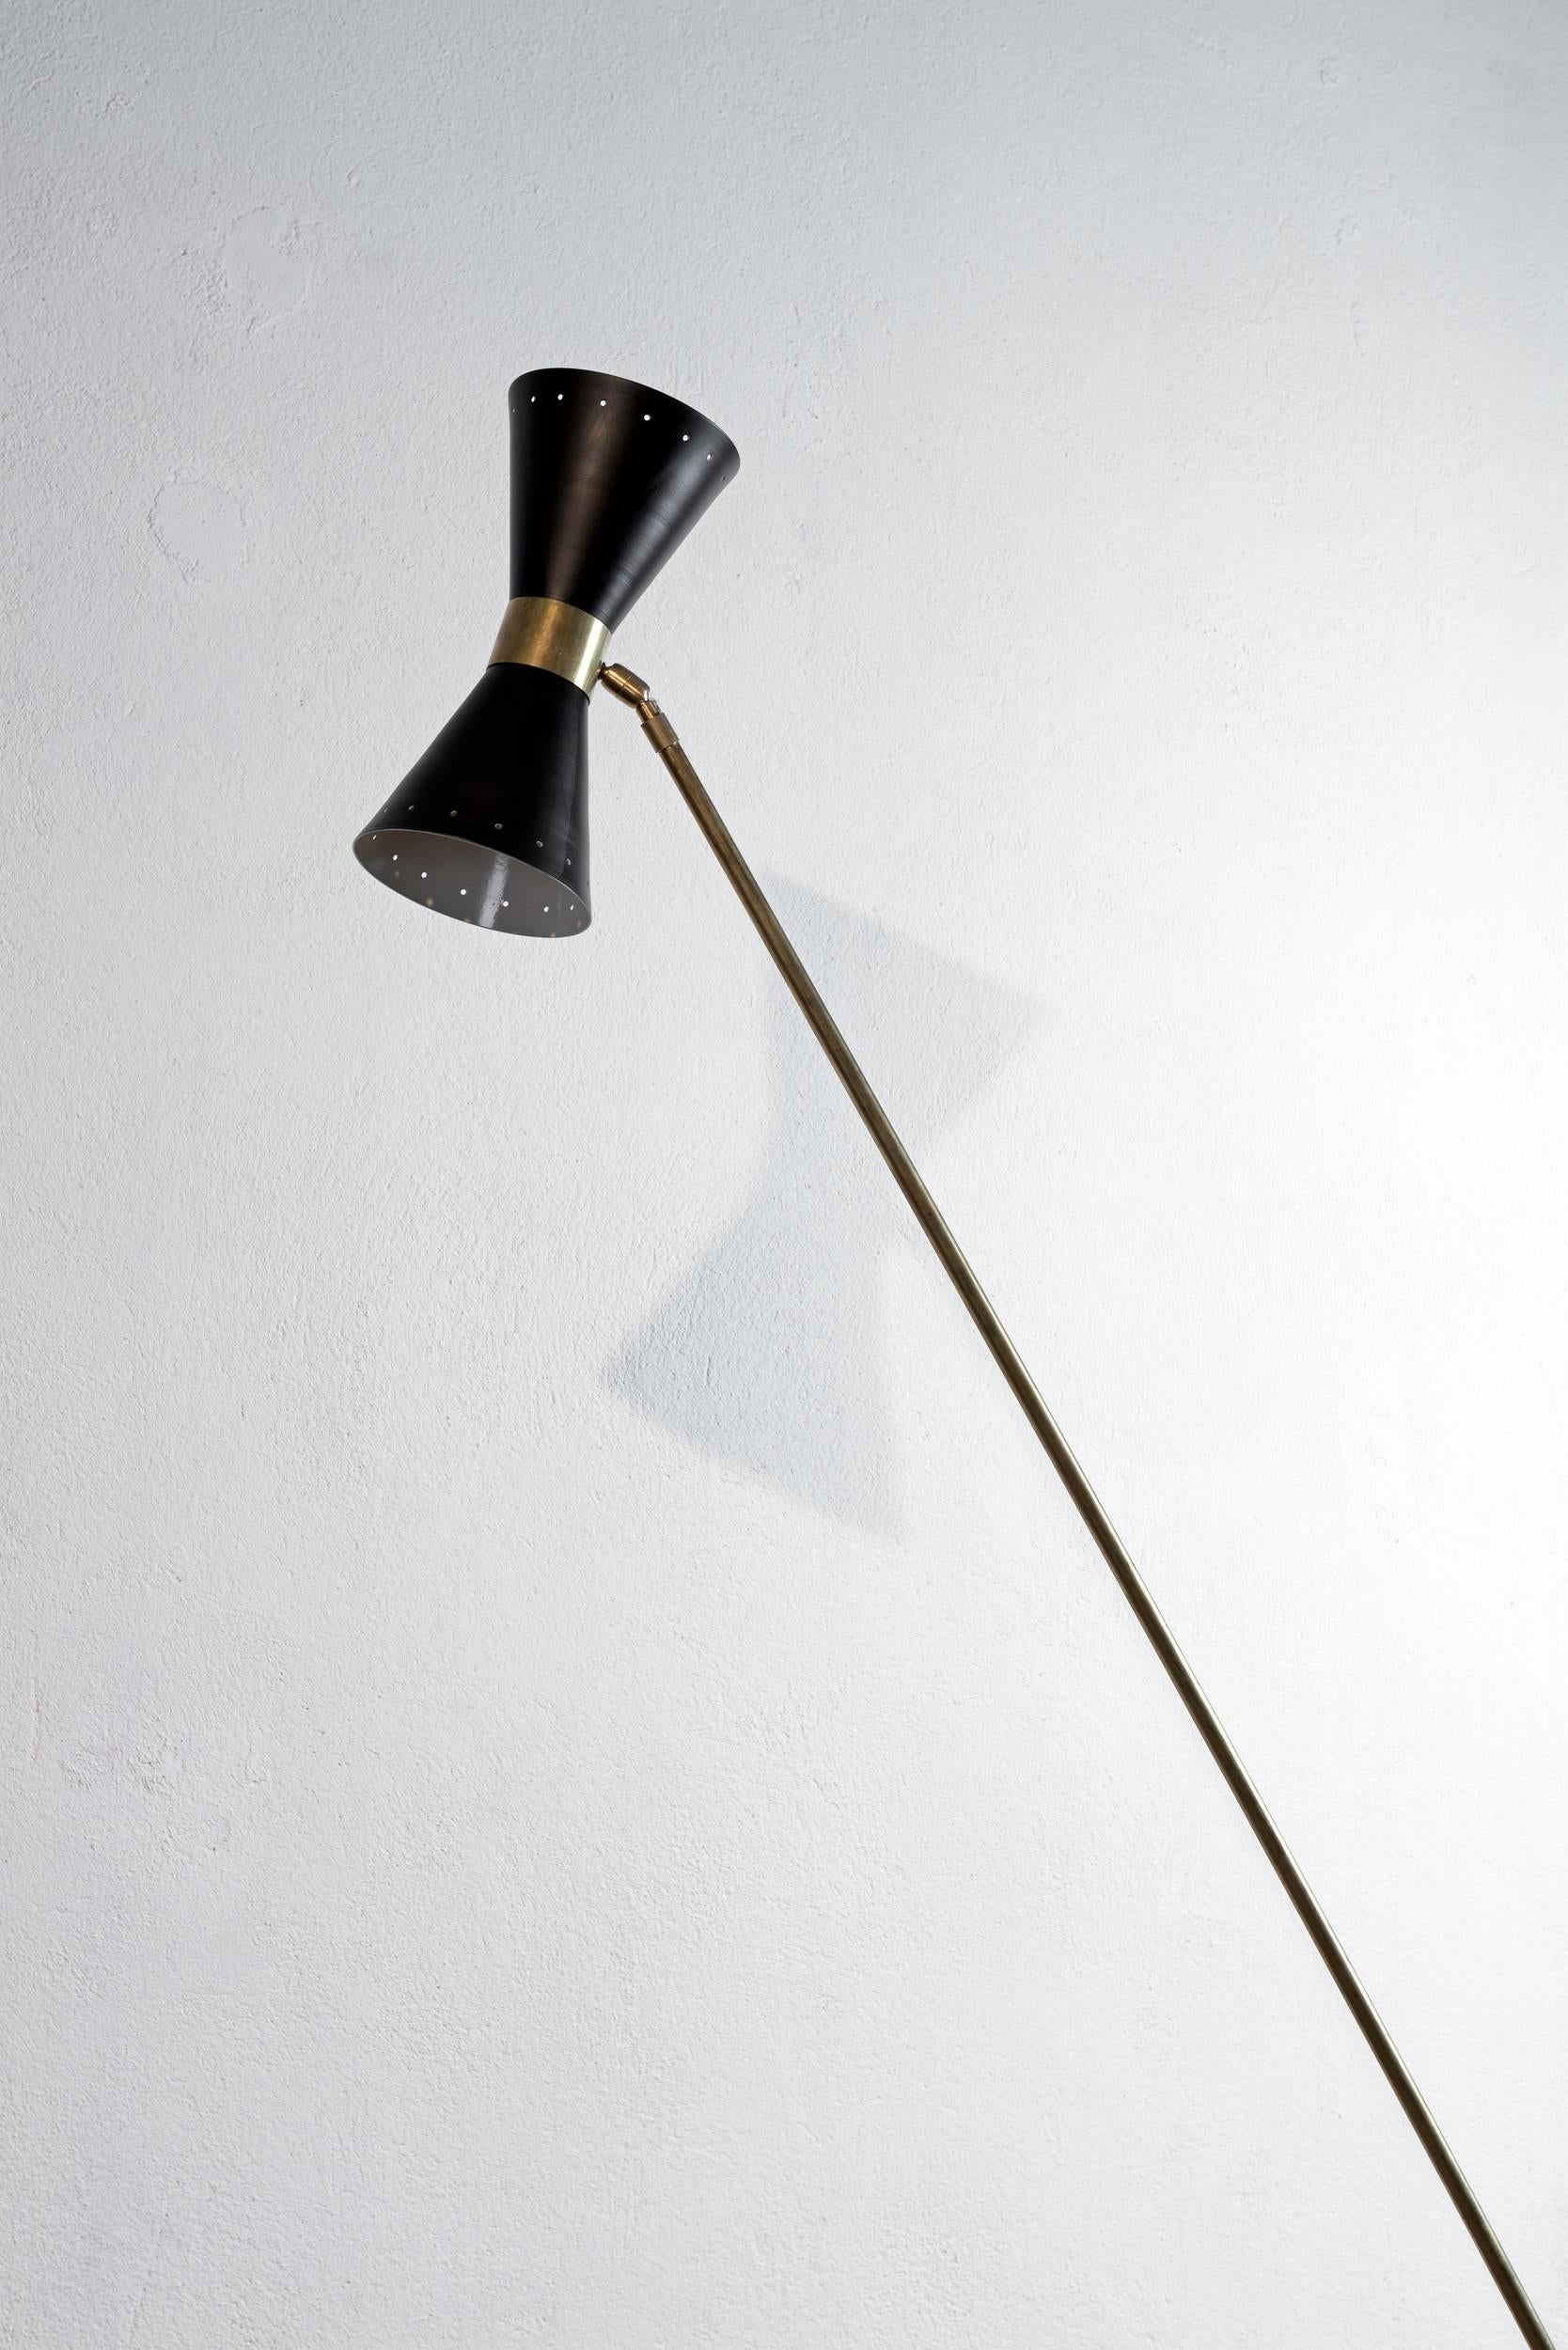 Stylish Italian 1950s Stilnovo floor lamp. The shade for two bulbs. Black painted metal and polished brass.

Perfect working order, rewired.